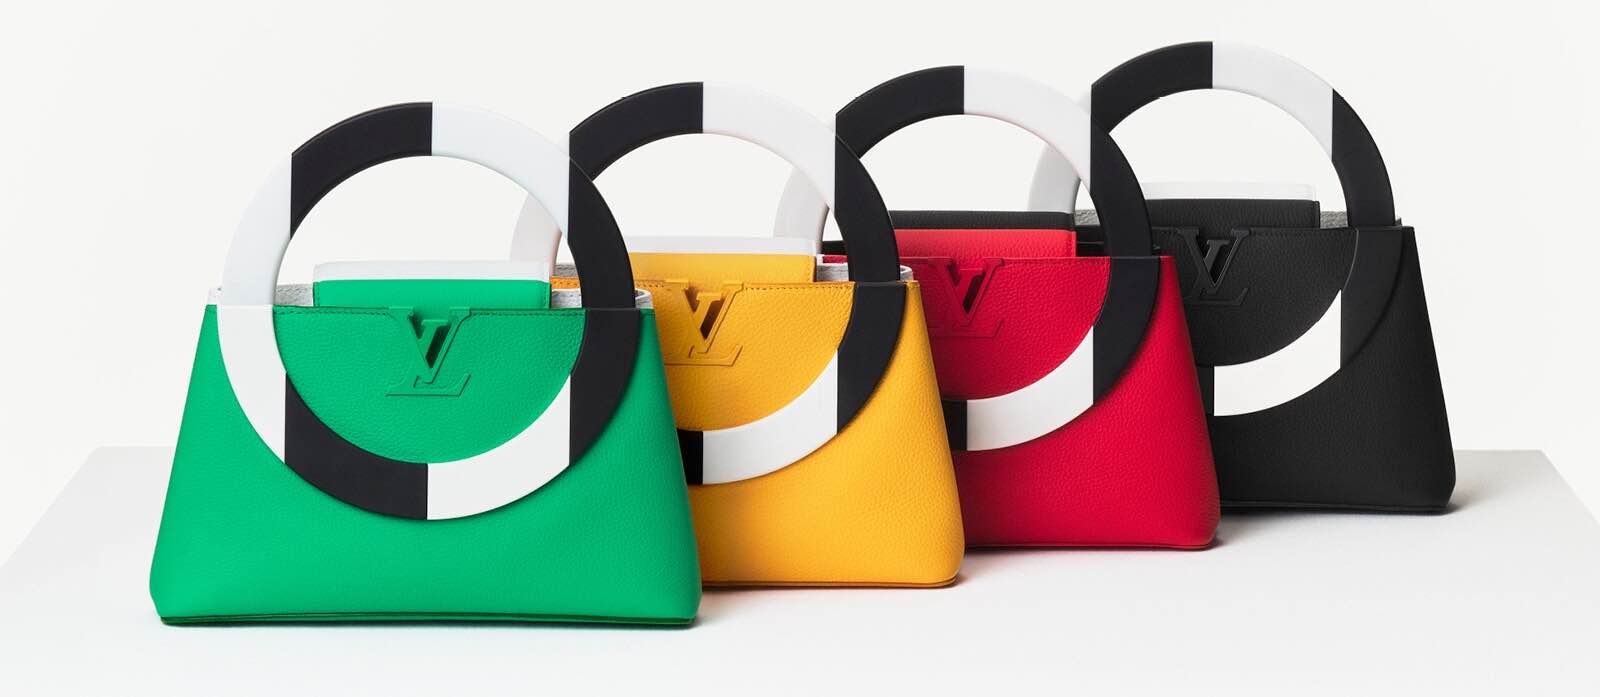 Louis Vuitton's Artycapucines bags: where art and fashion collide